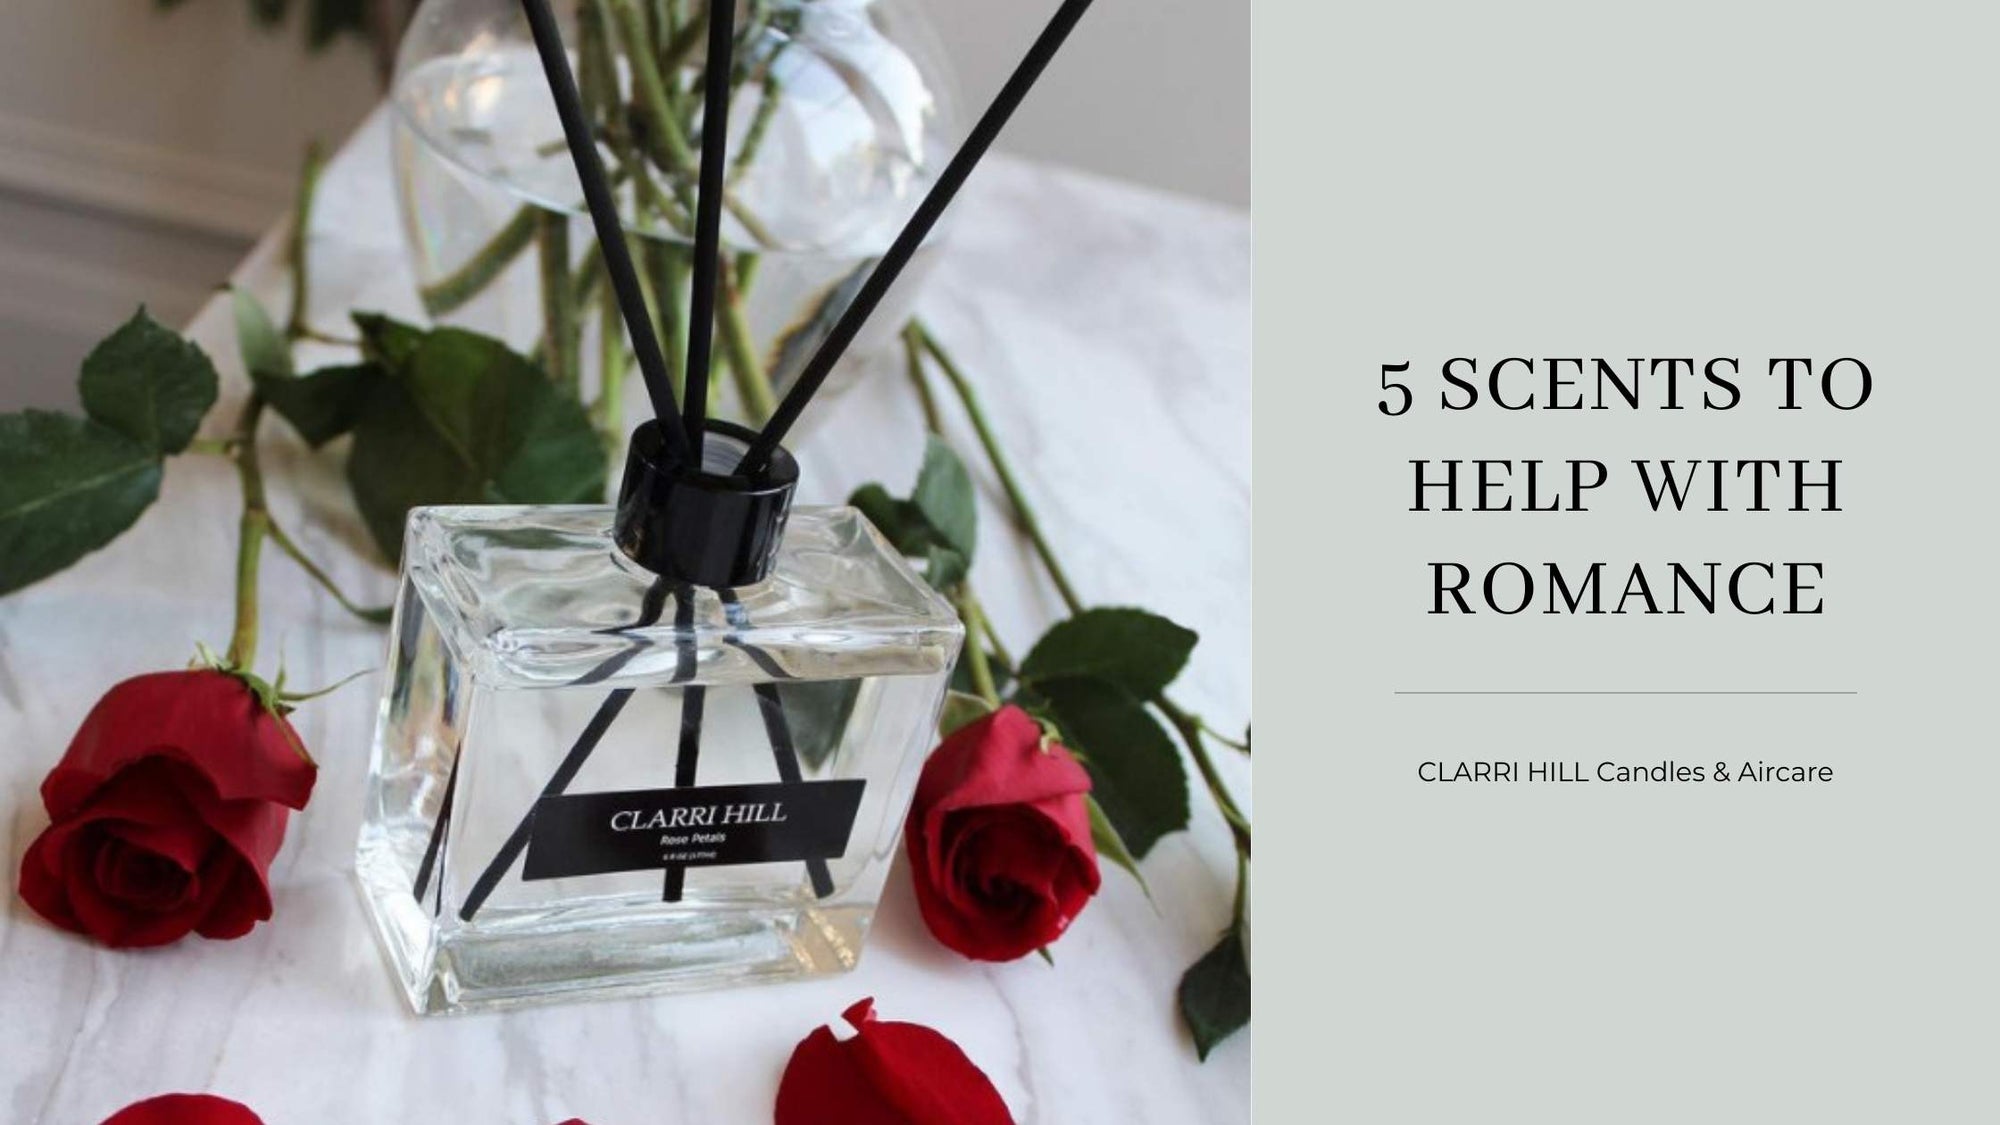 5 Scents to Help with Romance